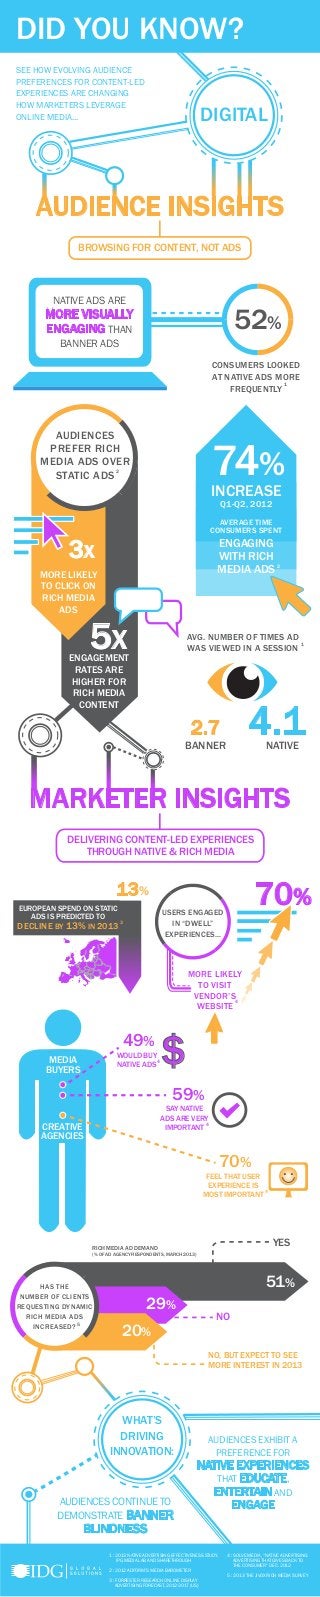 SEE HOW EVOLVING AUDIENCE
PREFERENCES FOR CONTENT-LED
EXPERIENCES ARE CHANGING
HOW MARKETERS LEVERAGE
ONLINE MEDIA... DIGITAL
DID YOU KNOW?
AUDIENCE INSIGHTS
MARKETER INSIGHTS
BROWSING FOR CONTENT, NOT ADS
52%
NATIVE ADS ARE
MORE VISUALLY
ENGAGING THAN
BANNER ADS
CONSUMERS LOOKED
AT NATIVE ADS MORE
FREQUENTLY
AVG. NUMBER OF TIMES AD
WAS VIEWED IN A SESSION
2.7 4.1NATIVEBANNER
74%
INCREASE
Q1-Q2, 2012
AVERAGE TIME
CONSUMERS SPENT
ENGAGING
WITH RICH
MEDIA ADS
3X
5X
MORE LIKELY
TO CLICK ON
RICH MEDIA
ADS
ENGAGEMENT
RATES ARE
HIGHER FOR
RICH MEDIA
CONTENT
AUDIENCES
PREFER RICH
MEDIA ADS OVER
STATIC ADS
DELIVERING CONTENT-LED EXPERIENCES
THROUGH NATIVE & RICH MEDIA
13%
MORE LIKELY
TO VISIT
VENDOR’S
WEBSITE
70%USERS ENGAGED
IN “DWELL”
EXPERIENCES...
59%
49%
70%
FEEL THAT USER
EXPERIENCE IS
MOST IMPORTANT
SAY NATIVE
ADS ARE VERY
IMPORTANT
WOULD BUY
NATIVE ADS
MEDIA
BUYERS
CREATIVE
AGENCIES
$
EUROPEAN SPEND ON STATIC
ADS IS PREDICTED TO
DECLINE BY 13% IN 2013
HAS THE
NUMBER OF CLIENTS
REQUESTING DYNAMIC
RICH MEDIA ADS
INCREASED?
NO, BUT EXPECT TO SEE
MORE INTEREST IN 2013
YES
NO
20%
29%
51%
RICH MEDIA AD DEMAND
(% OF AD AGENCY RESPONDENTS, MARCH 2013)
WHAT’S
DRIVING
INNOVATION:
AUDIENCES CONTINUE TO
DEMONSTRATE BANNER
BLINDNESS
AUDIENCES EXHIBIT A
PREFERENCE FOR
NATIVE EXPERIENCES
THAT EDUCATE,
ENTERTAIN AND
ENGAGE
1
1 : 2013 NATIVE ADVERTISING EFFECTIVENESS STUDY,
IPG MEDIA LAB AND SHARETHROUGH
2 : 2012 ADFORM’S MEDIA BAROMETER
3 : FORRESTER RESEARCH ONLINE DISPLAY
ADVERTISING FORECAST, 2012-2017 (US)
2
2
1
3
4 : SOLVE MEDIA, “NATIVE ADVERTISING:
ADVERTISING THAT GIVES BACK TO
THE CONSUMER” DEC. 2012
5 : 2013 THE JIVOX RICH MEDIA SURVEY
4
4
5
4
4
 